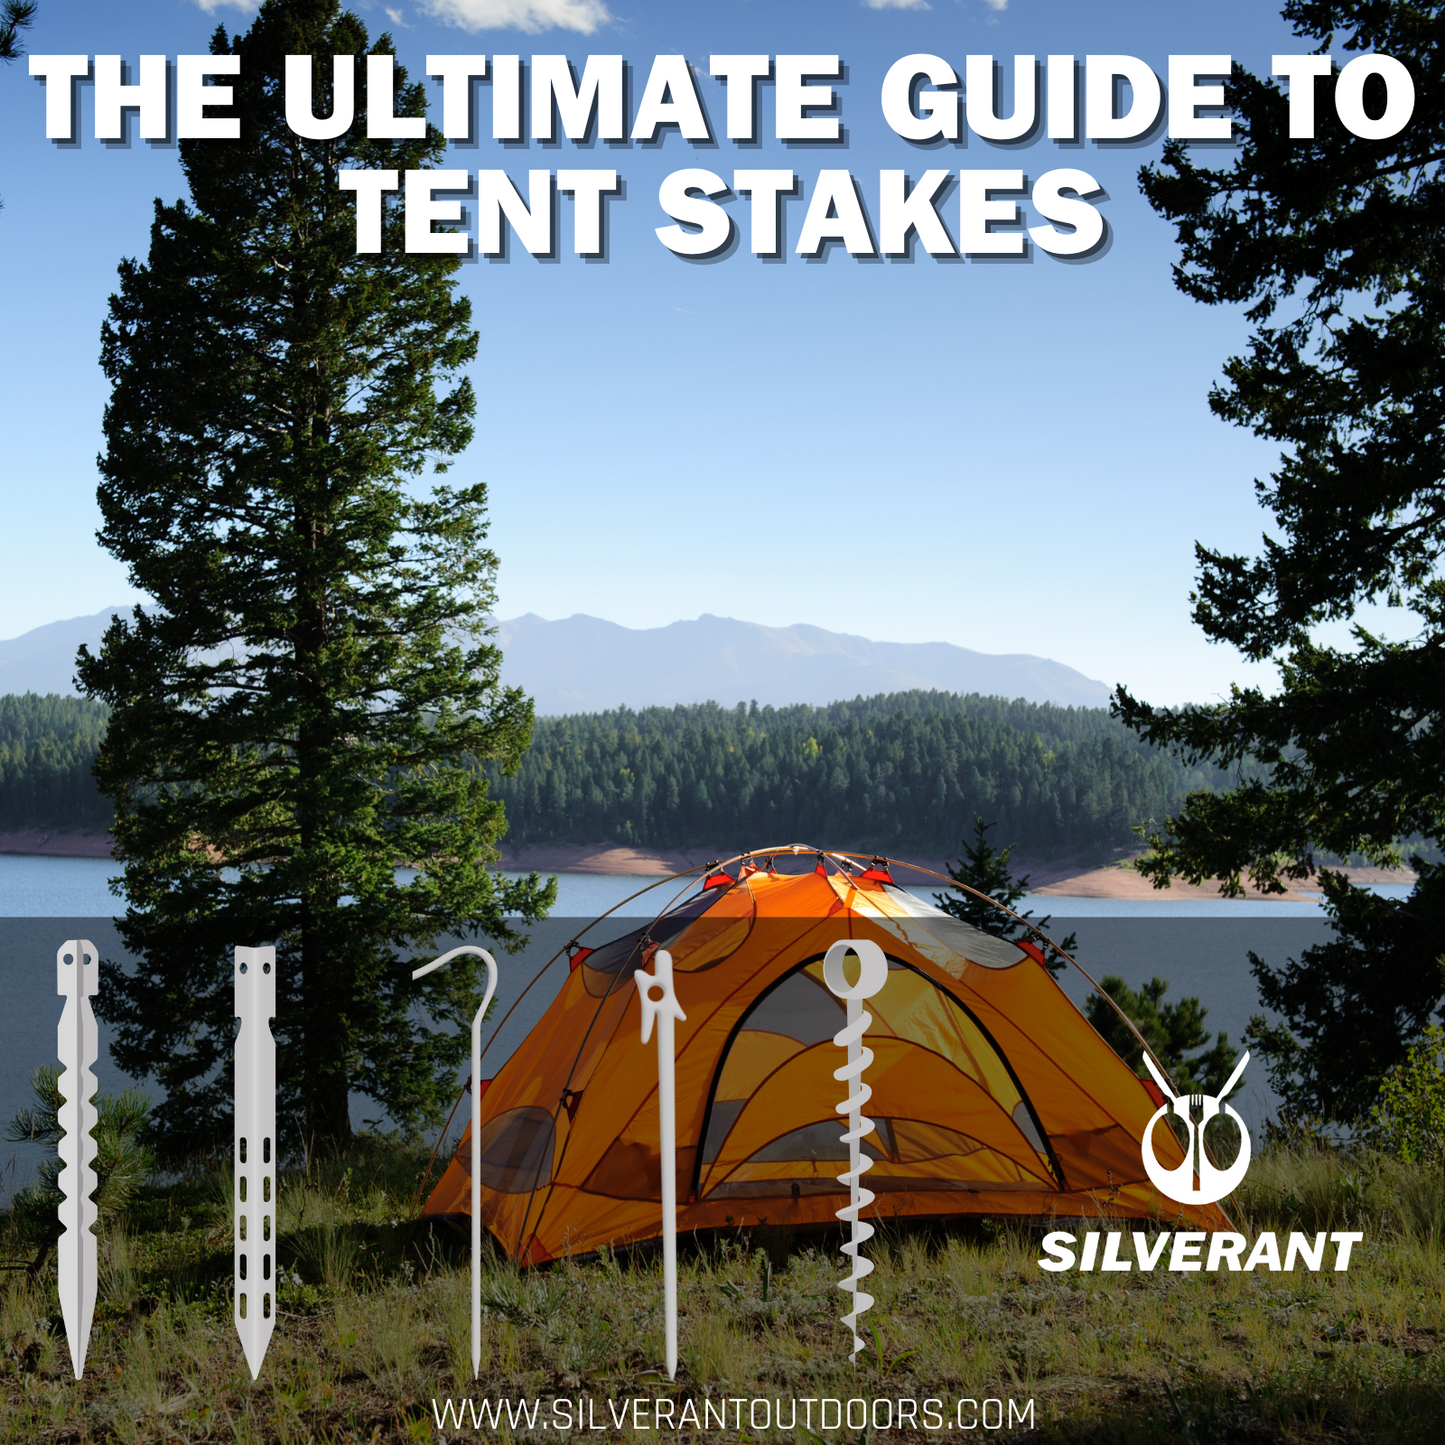 The Ultimate Guide to Tent Stakes